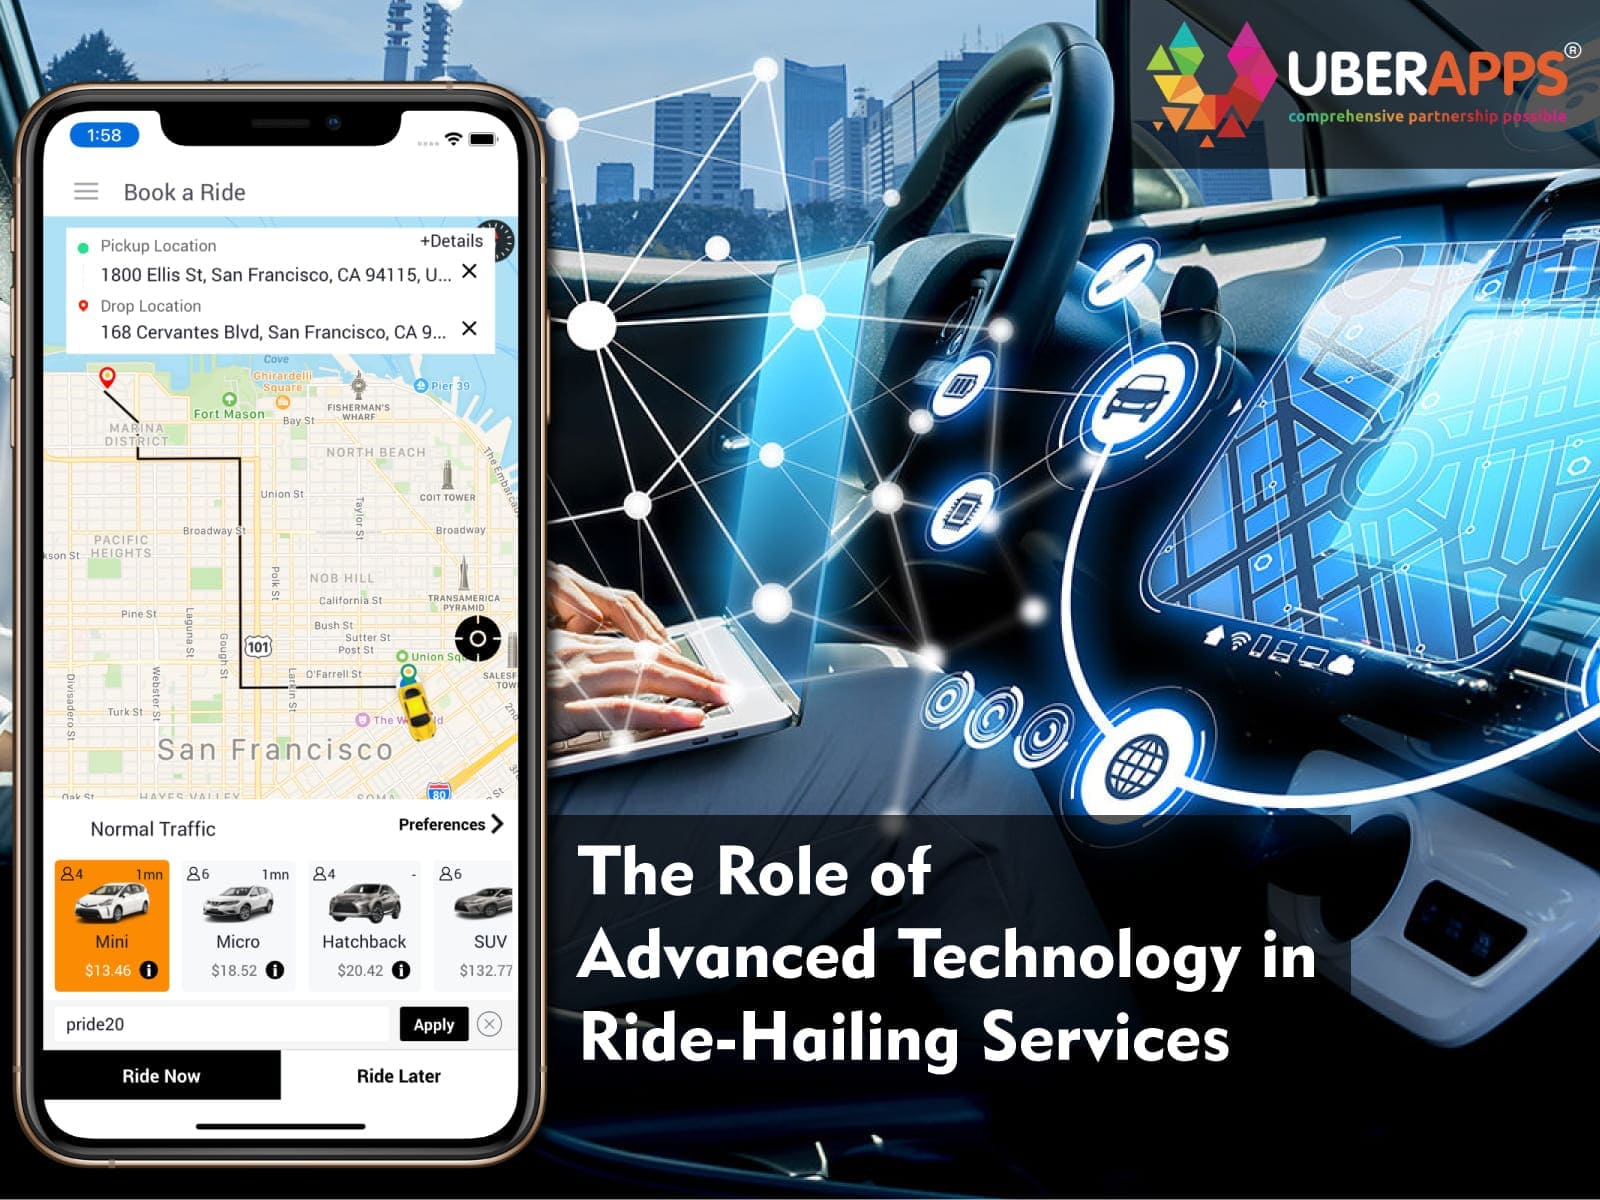 The Role Of Advanced Technology In Ride-hailing Services